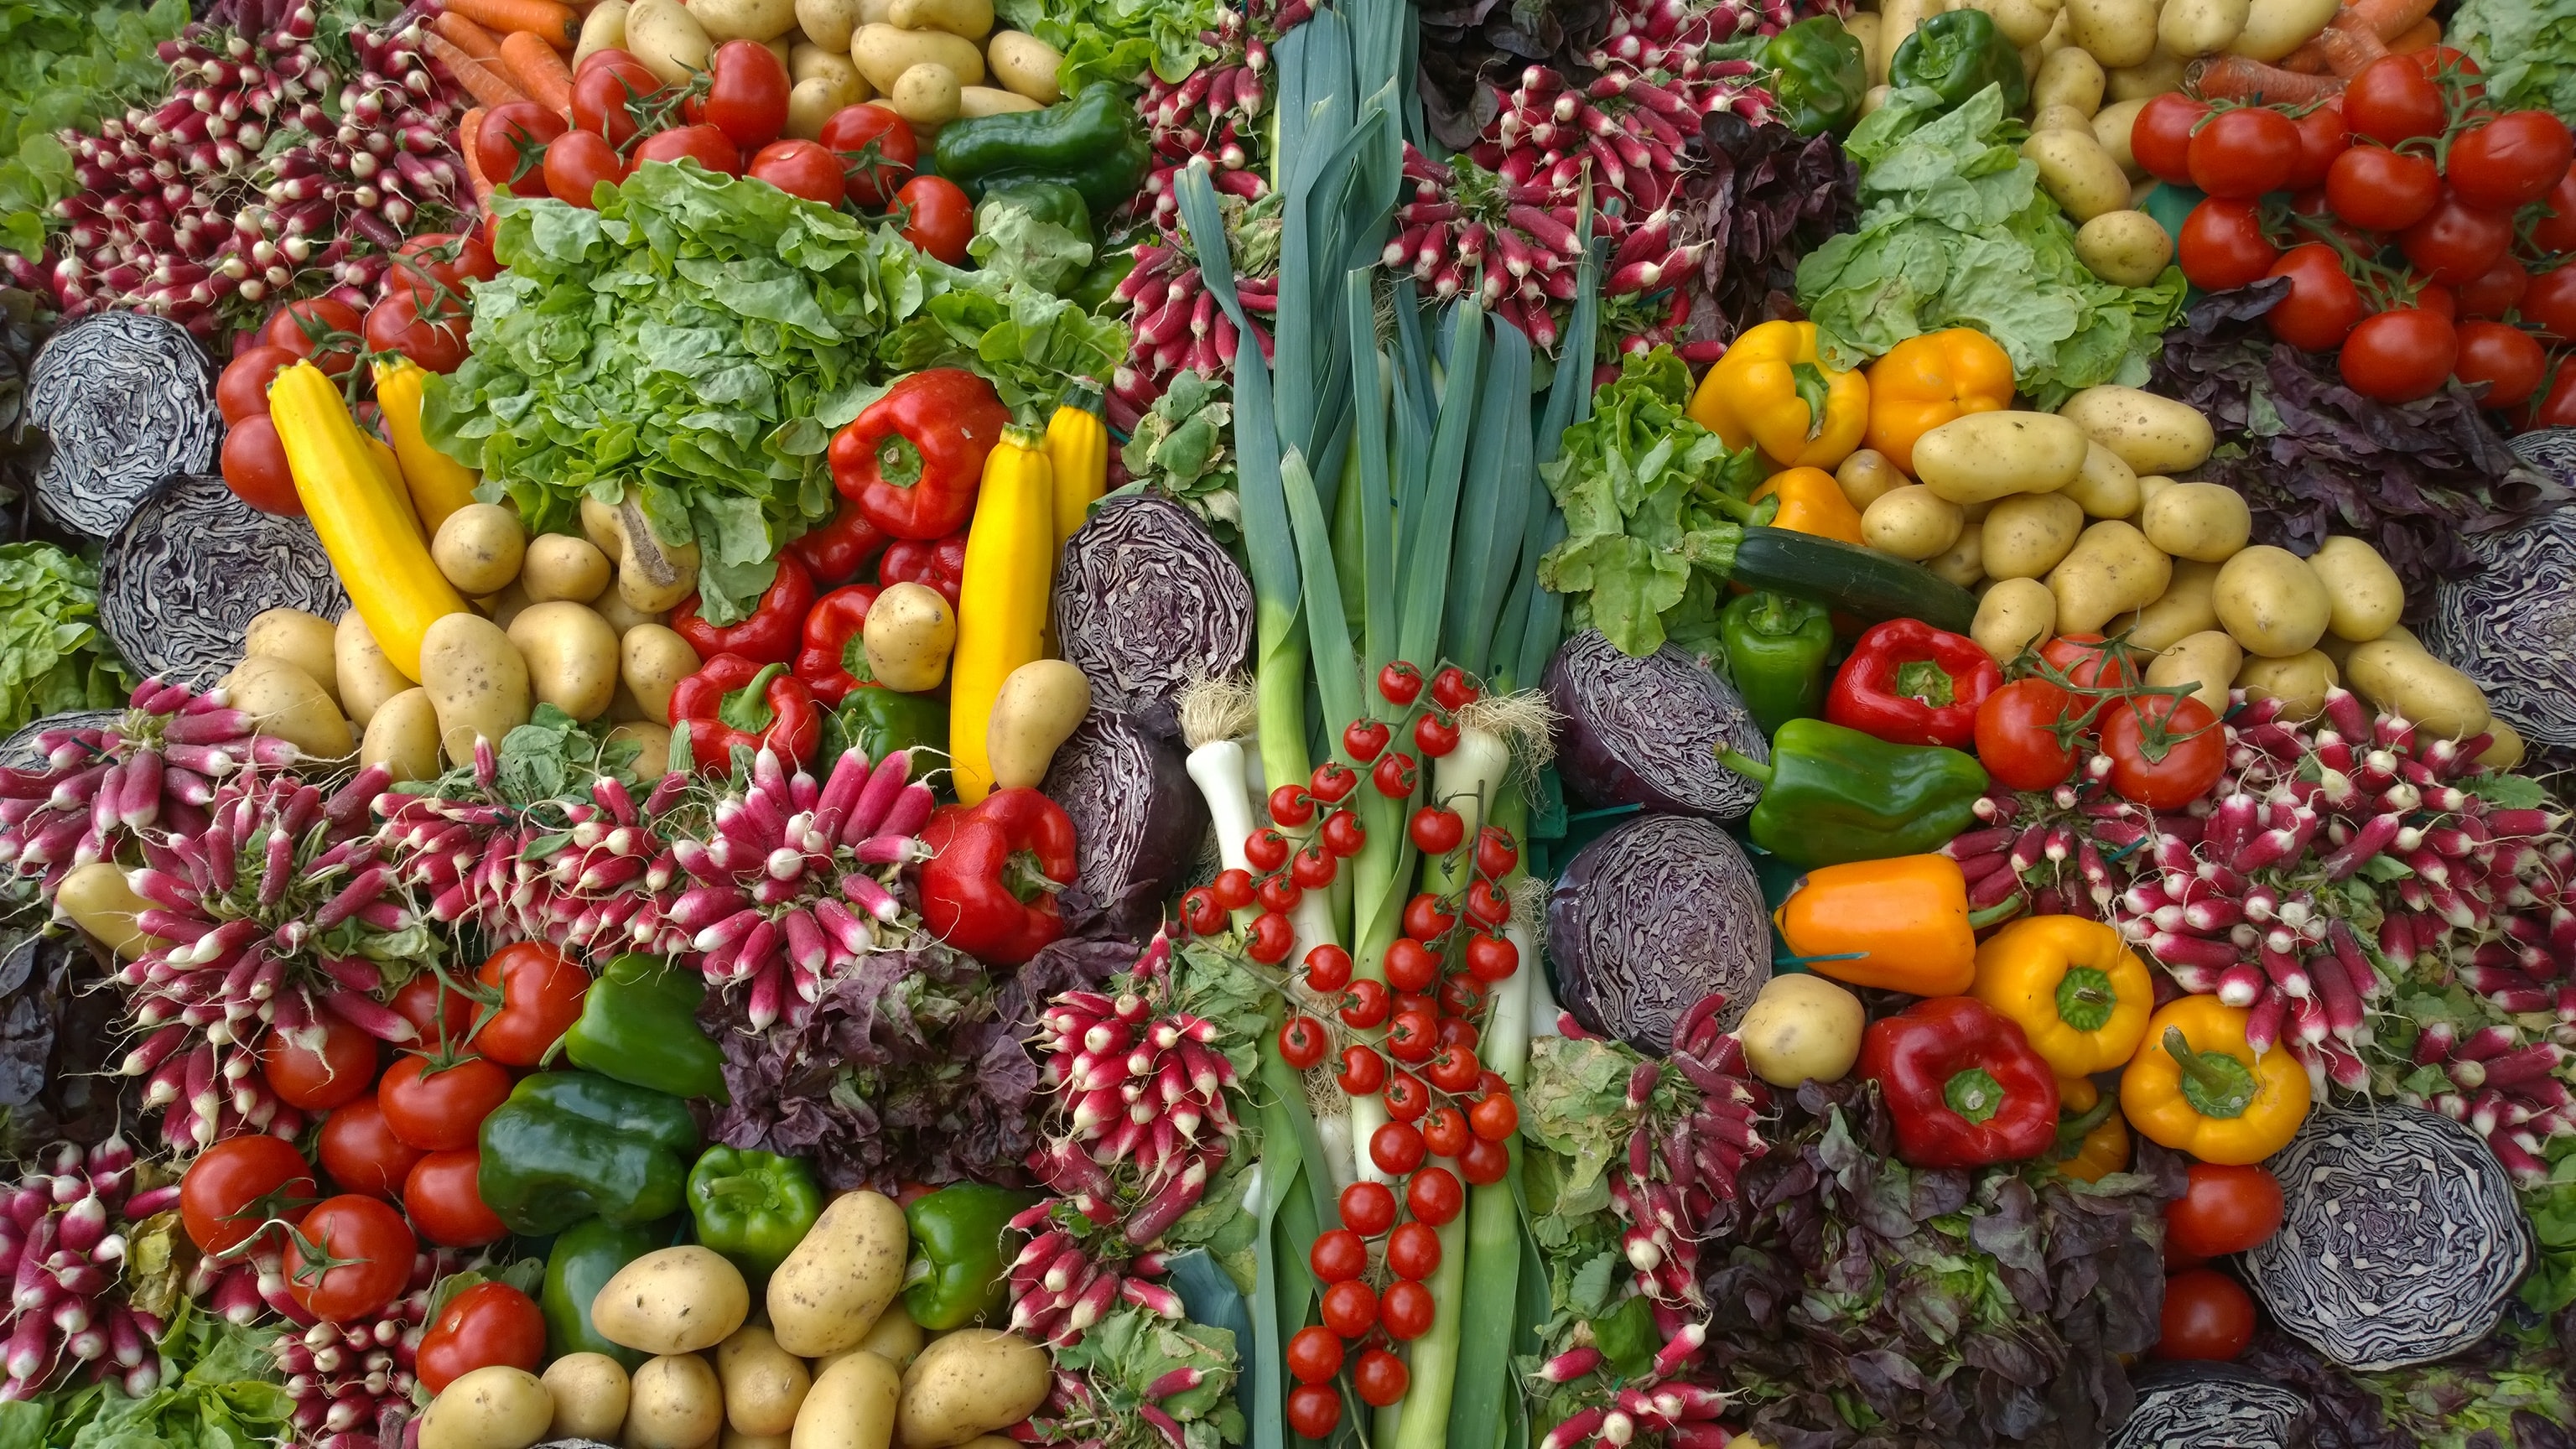 Large pile of a variety of fresh vegetables.